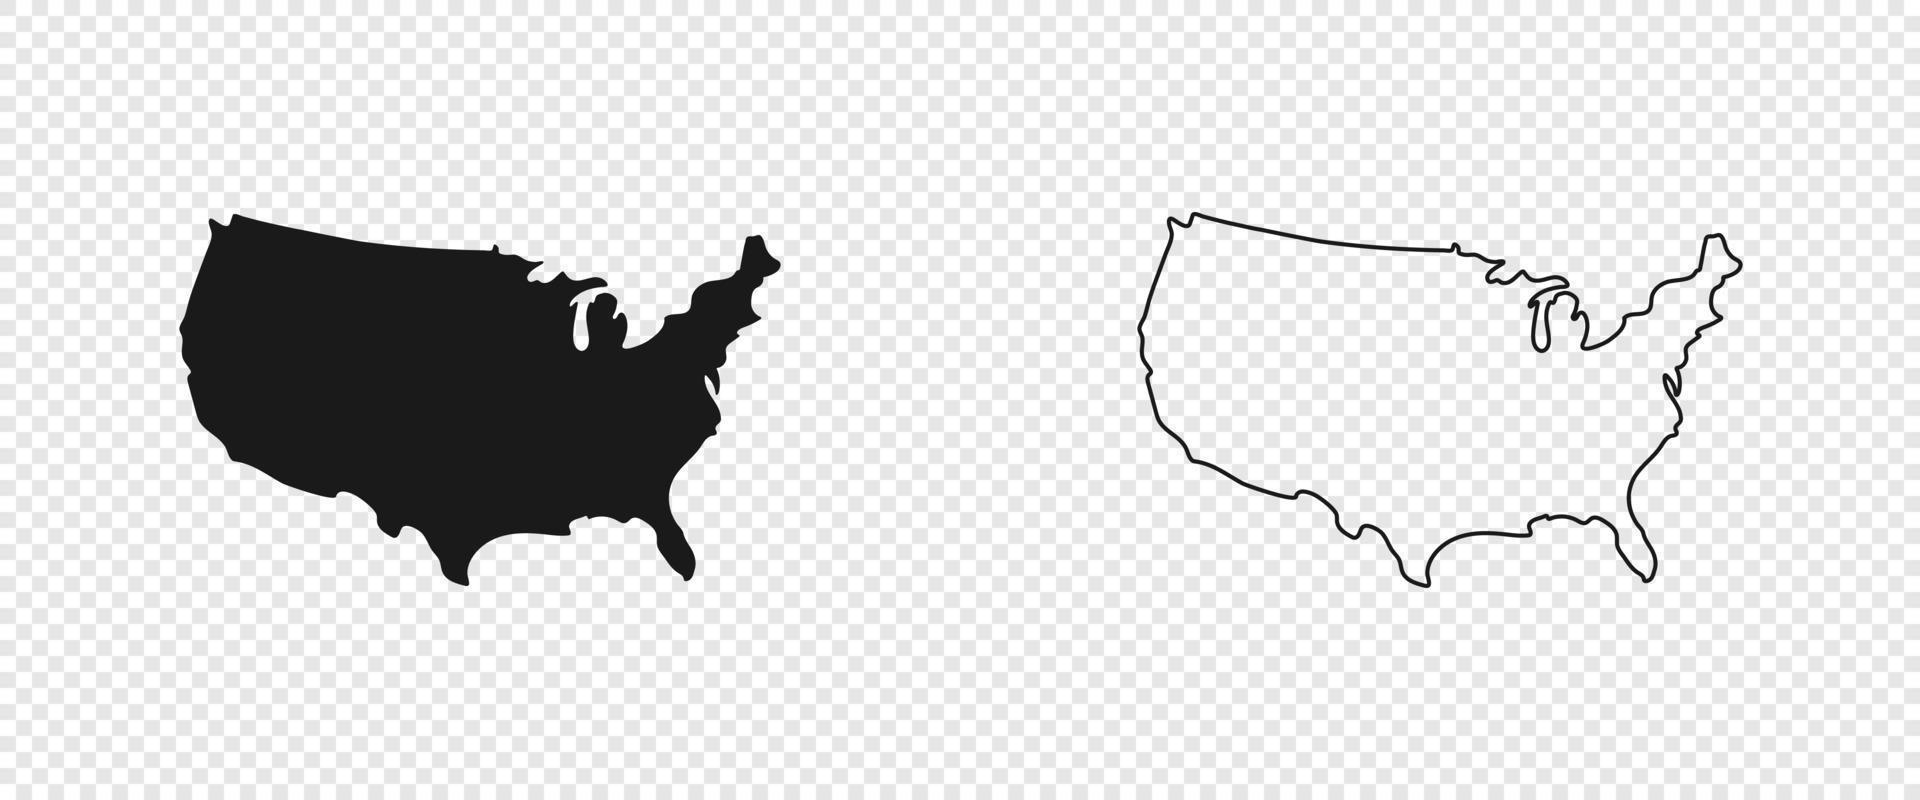 USA map. American map. United States of America map in flat and lines design. Eps10 vector